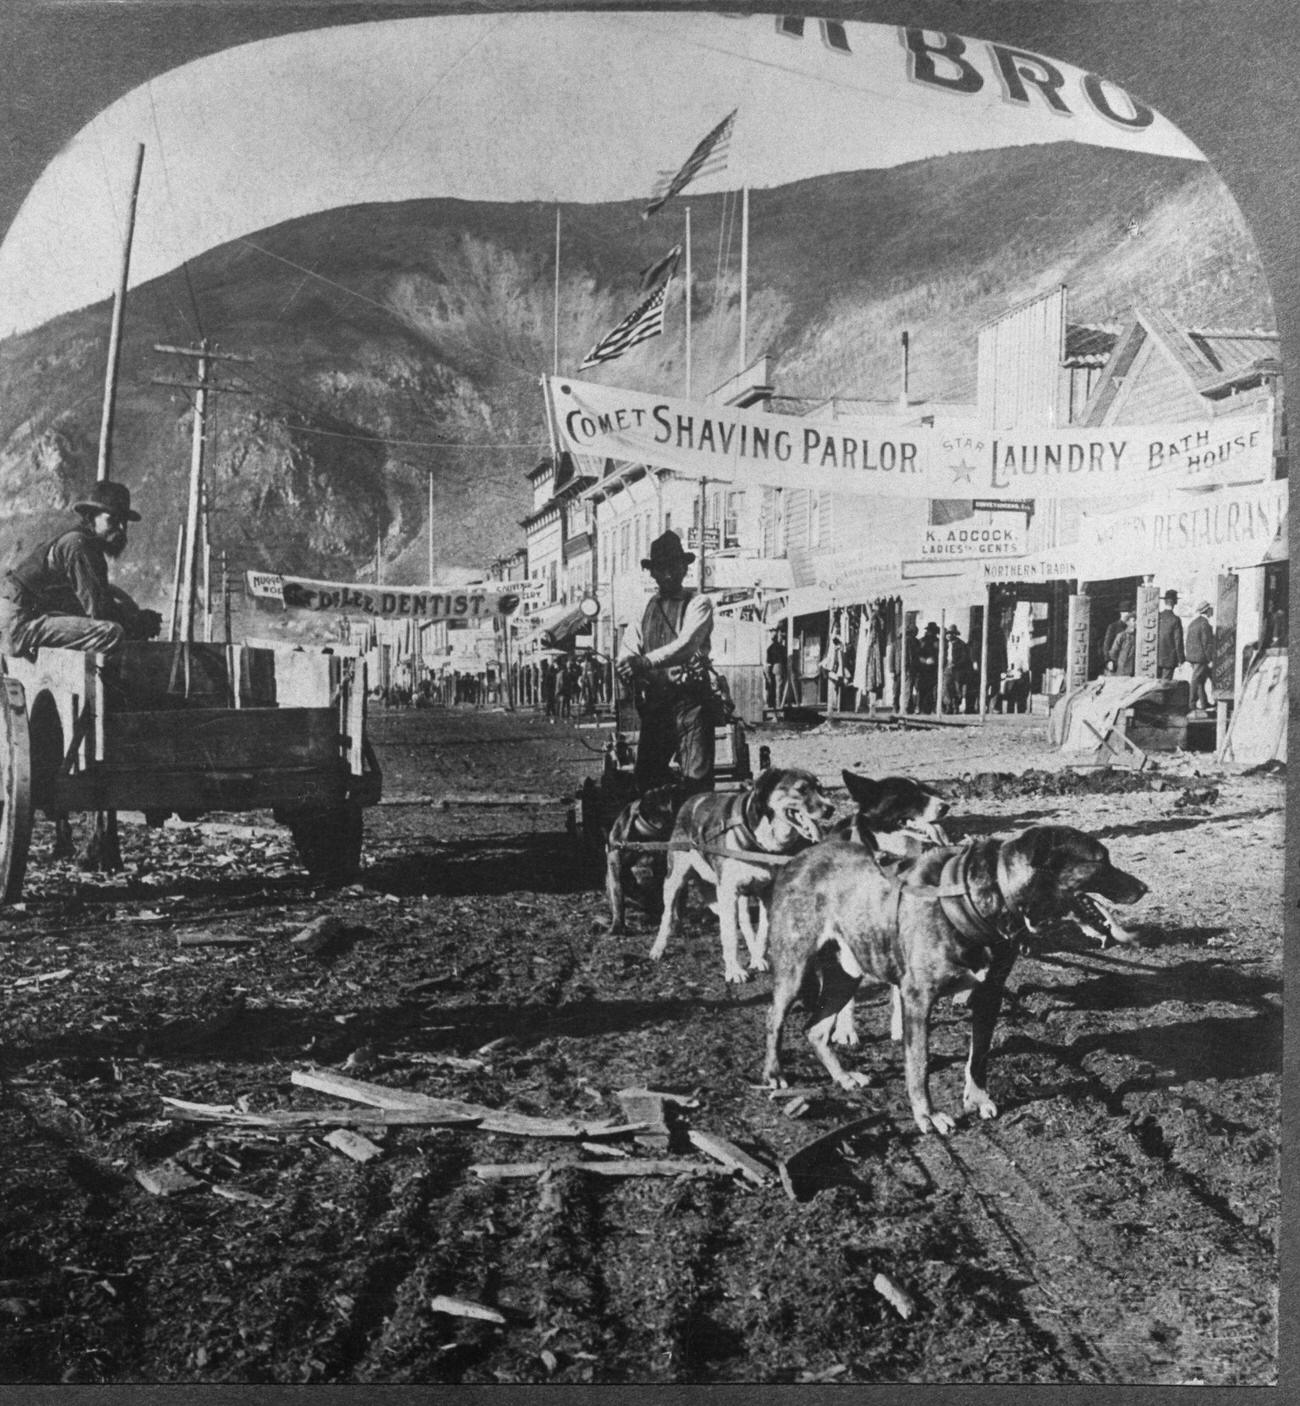 Dawson City, Alaska, street scene with carts, banners, pedestrians, and American flags during the Gold Rush, 1900.